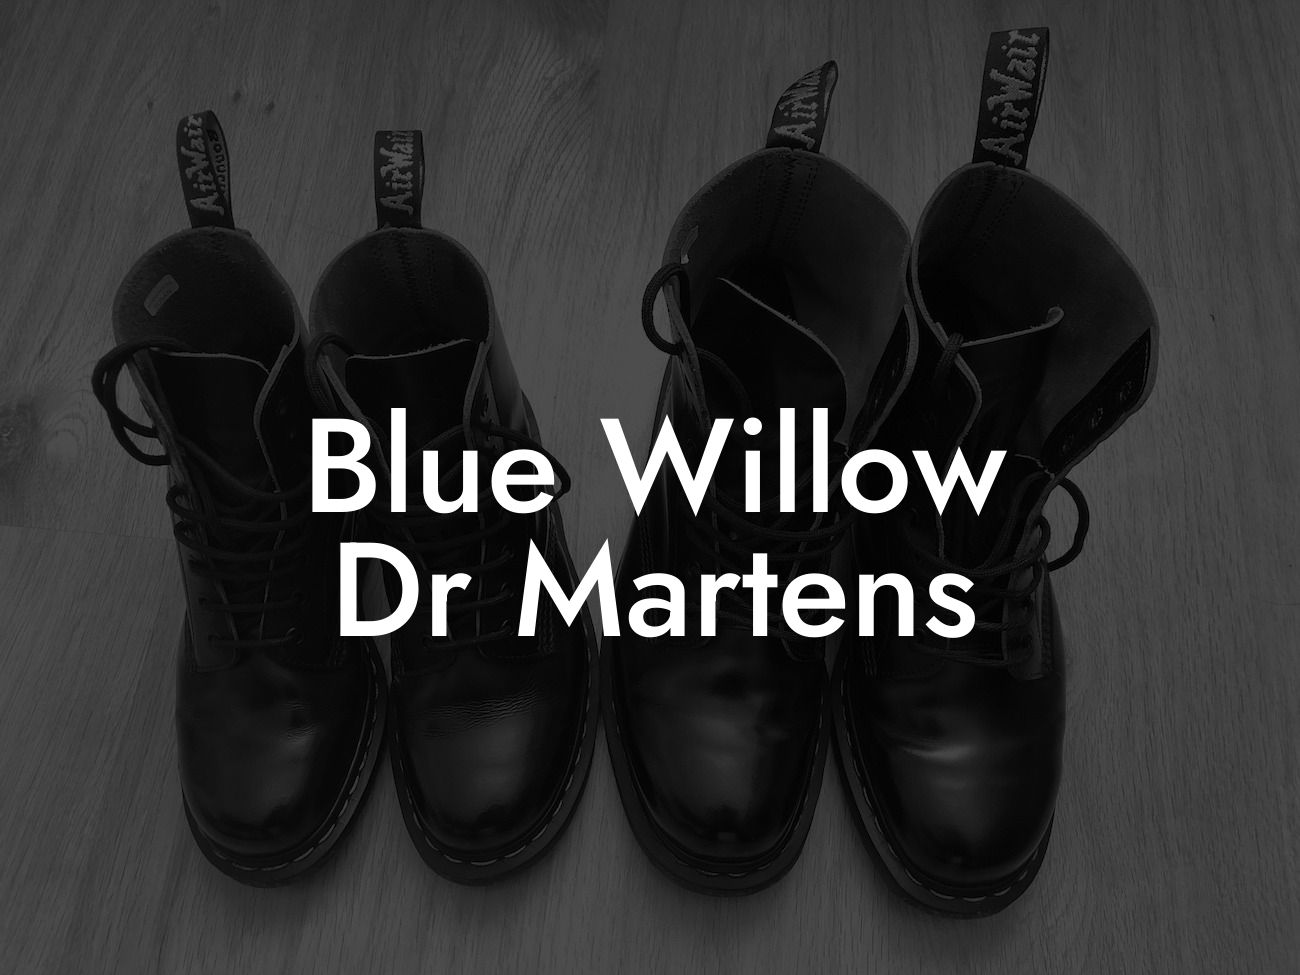 Blue Willow Dr Martens